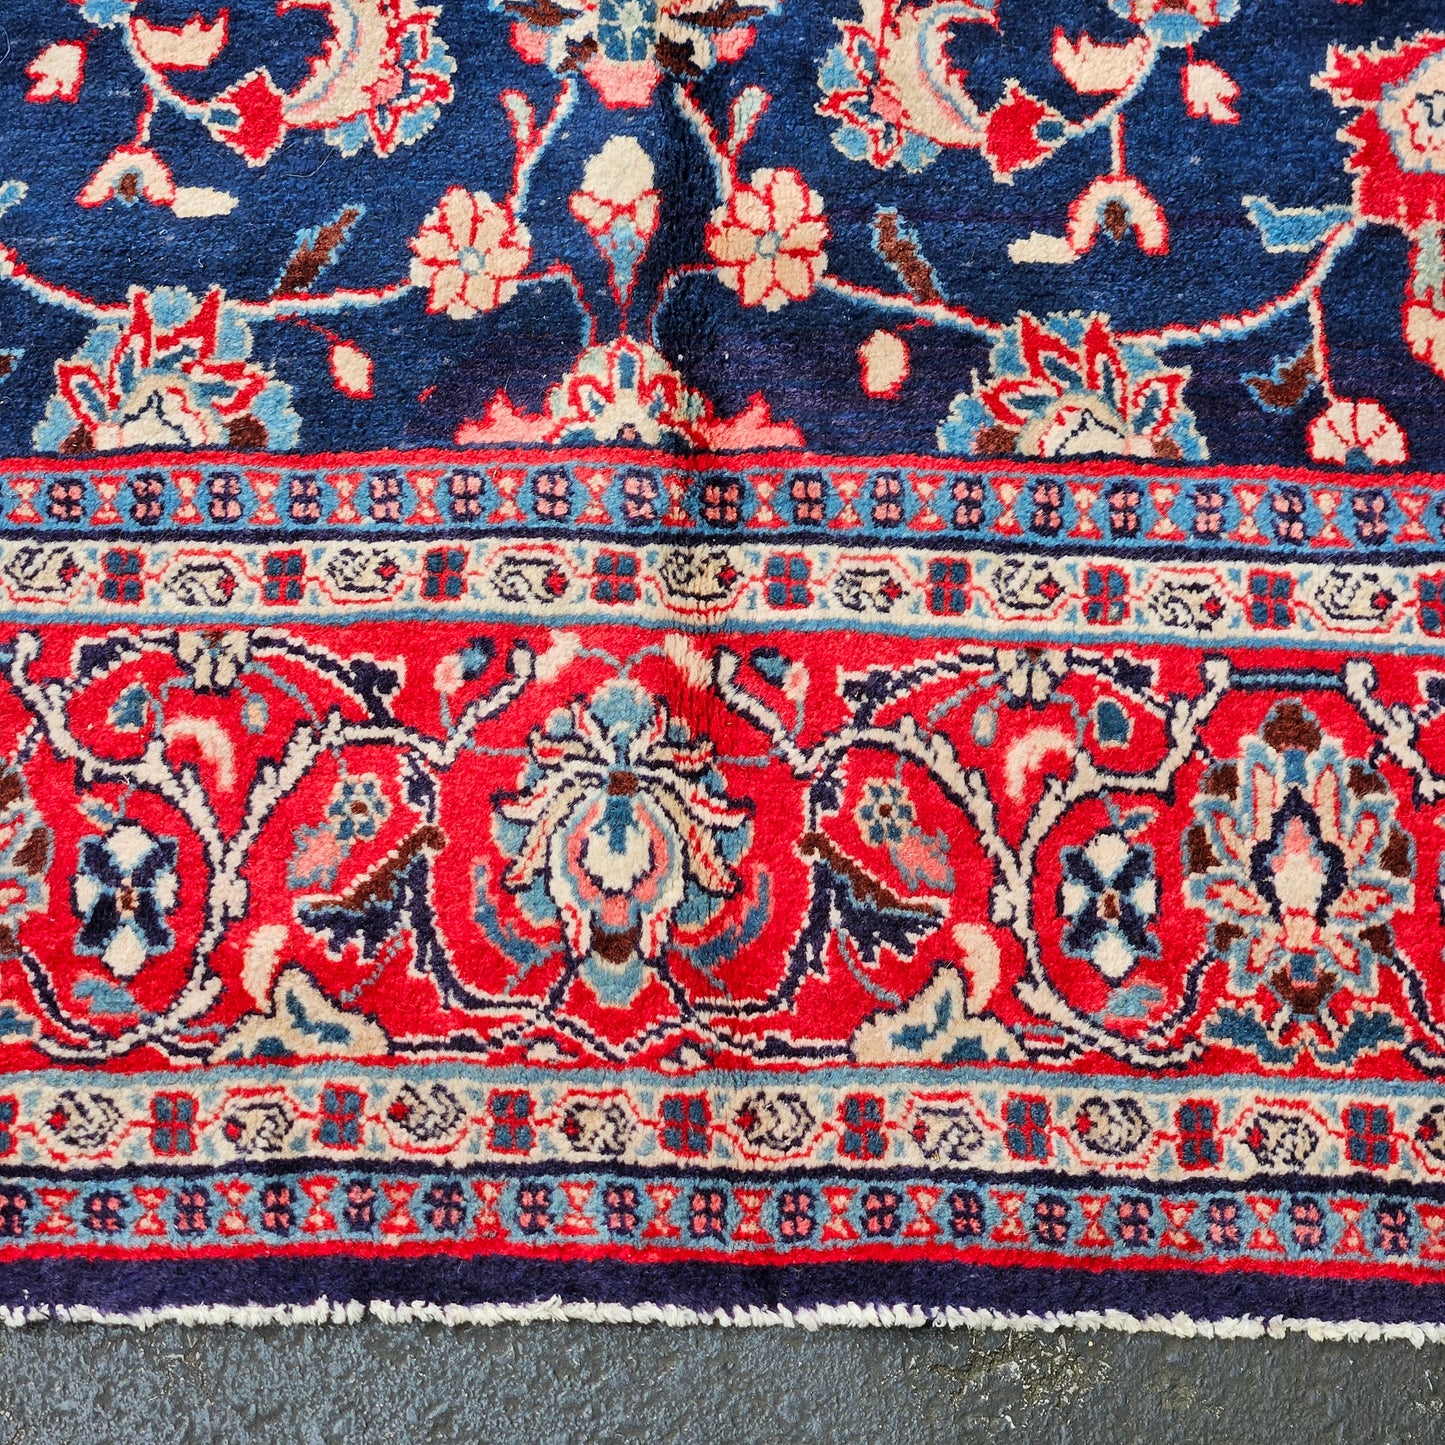 Vintage Hand Knotted Persian Room Size Rug / Carpet - 7' 7" x 9' 8"